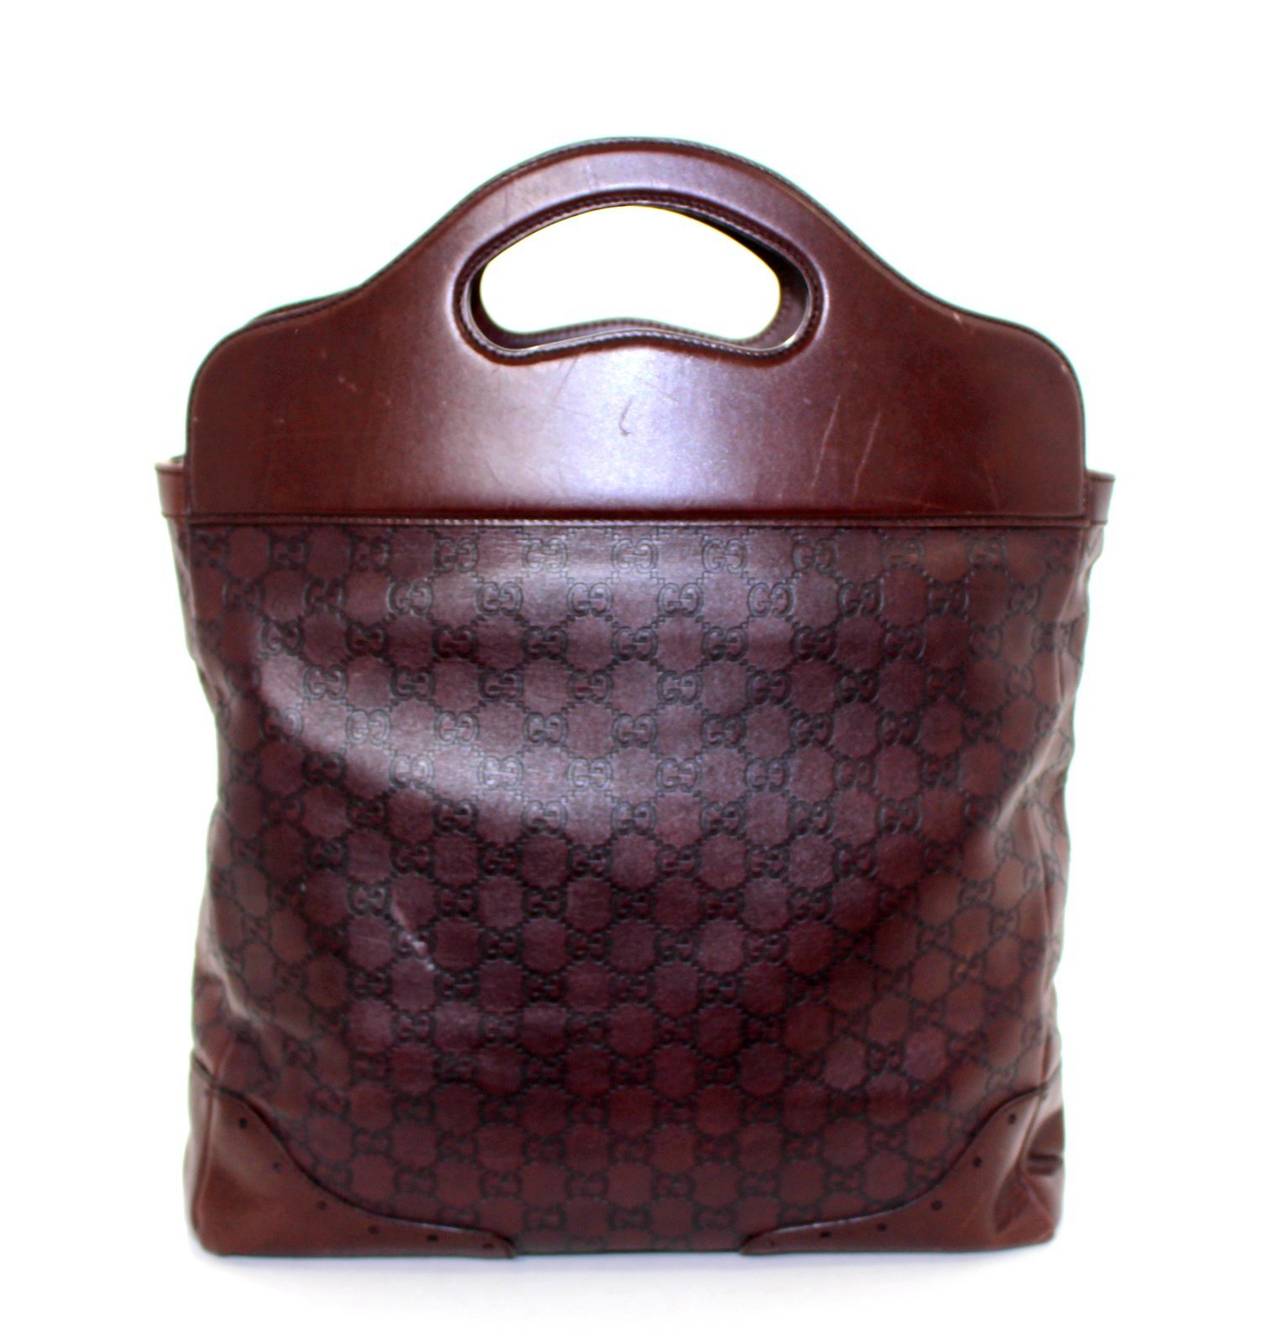 In good condition with light signs of prior ownership, this Dark Brown Guccisima Leather Tote from Gucci  is  perfect for daily use.  Each of the corners has small scratches as well as the smooth leather of the cut out handle area.    The interior